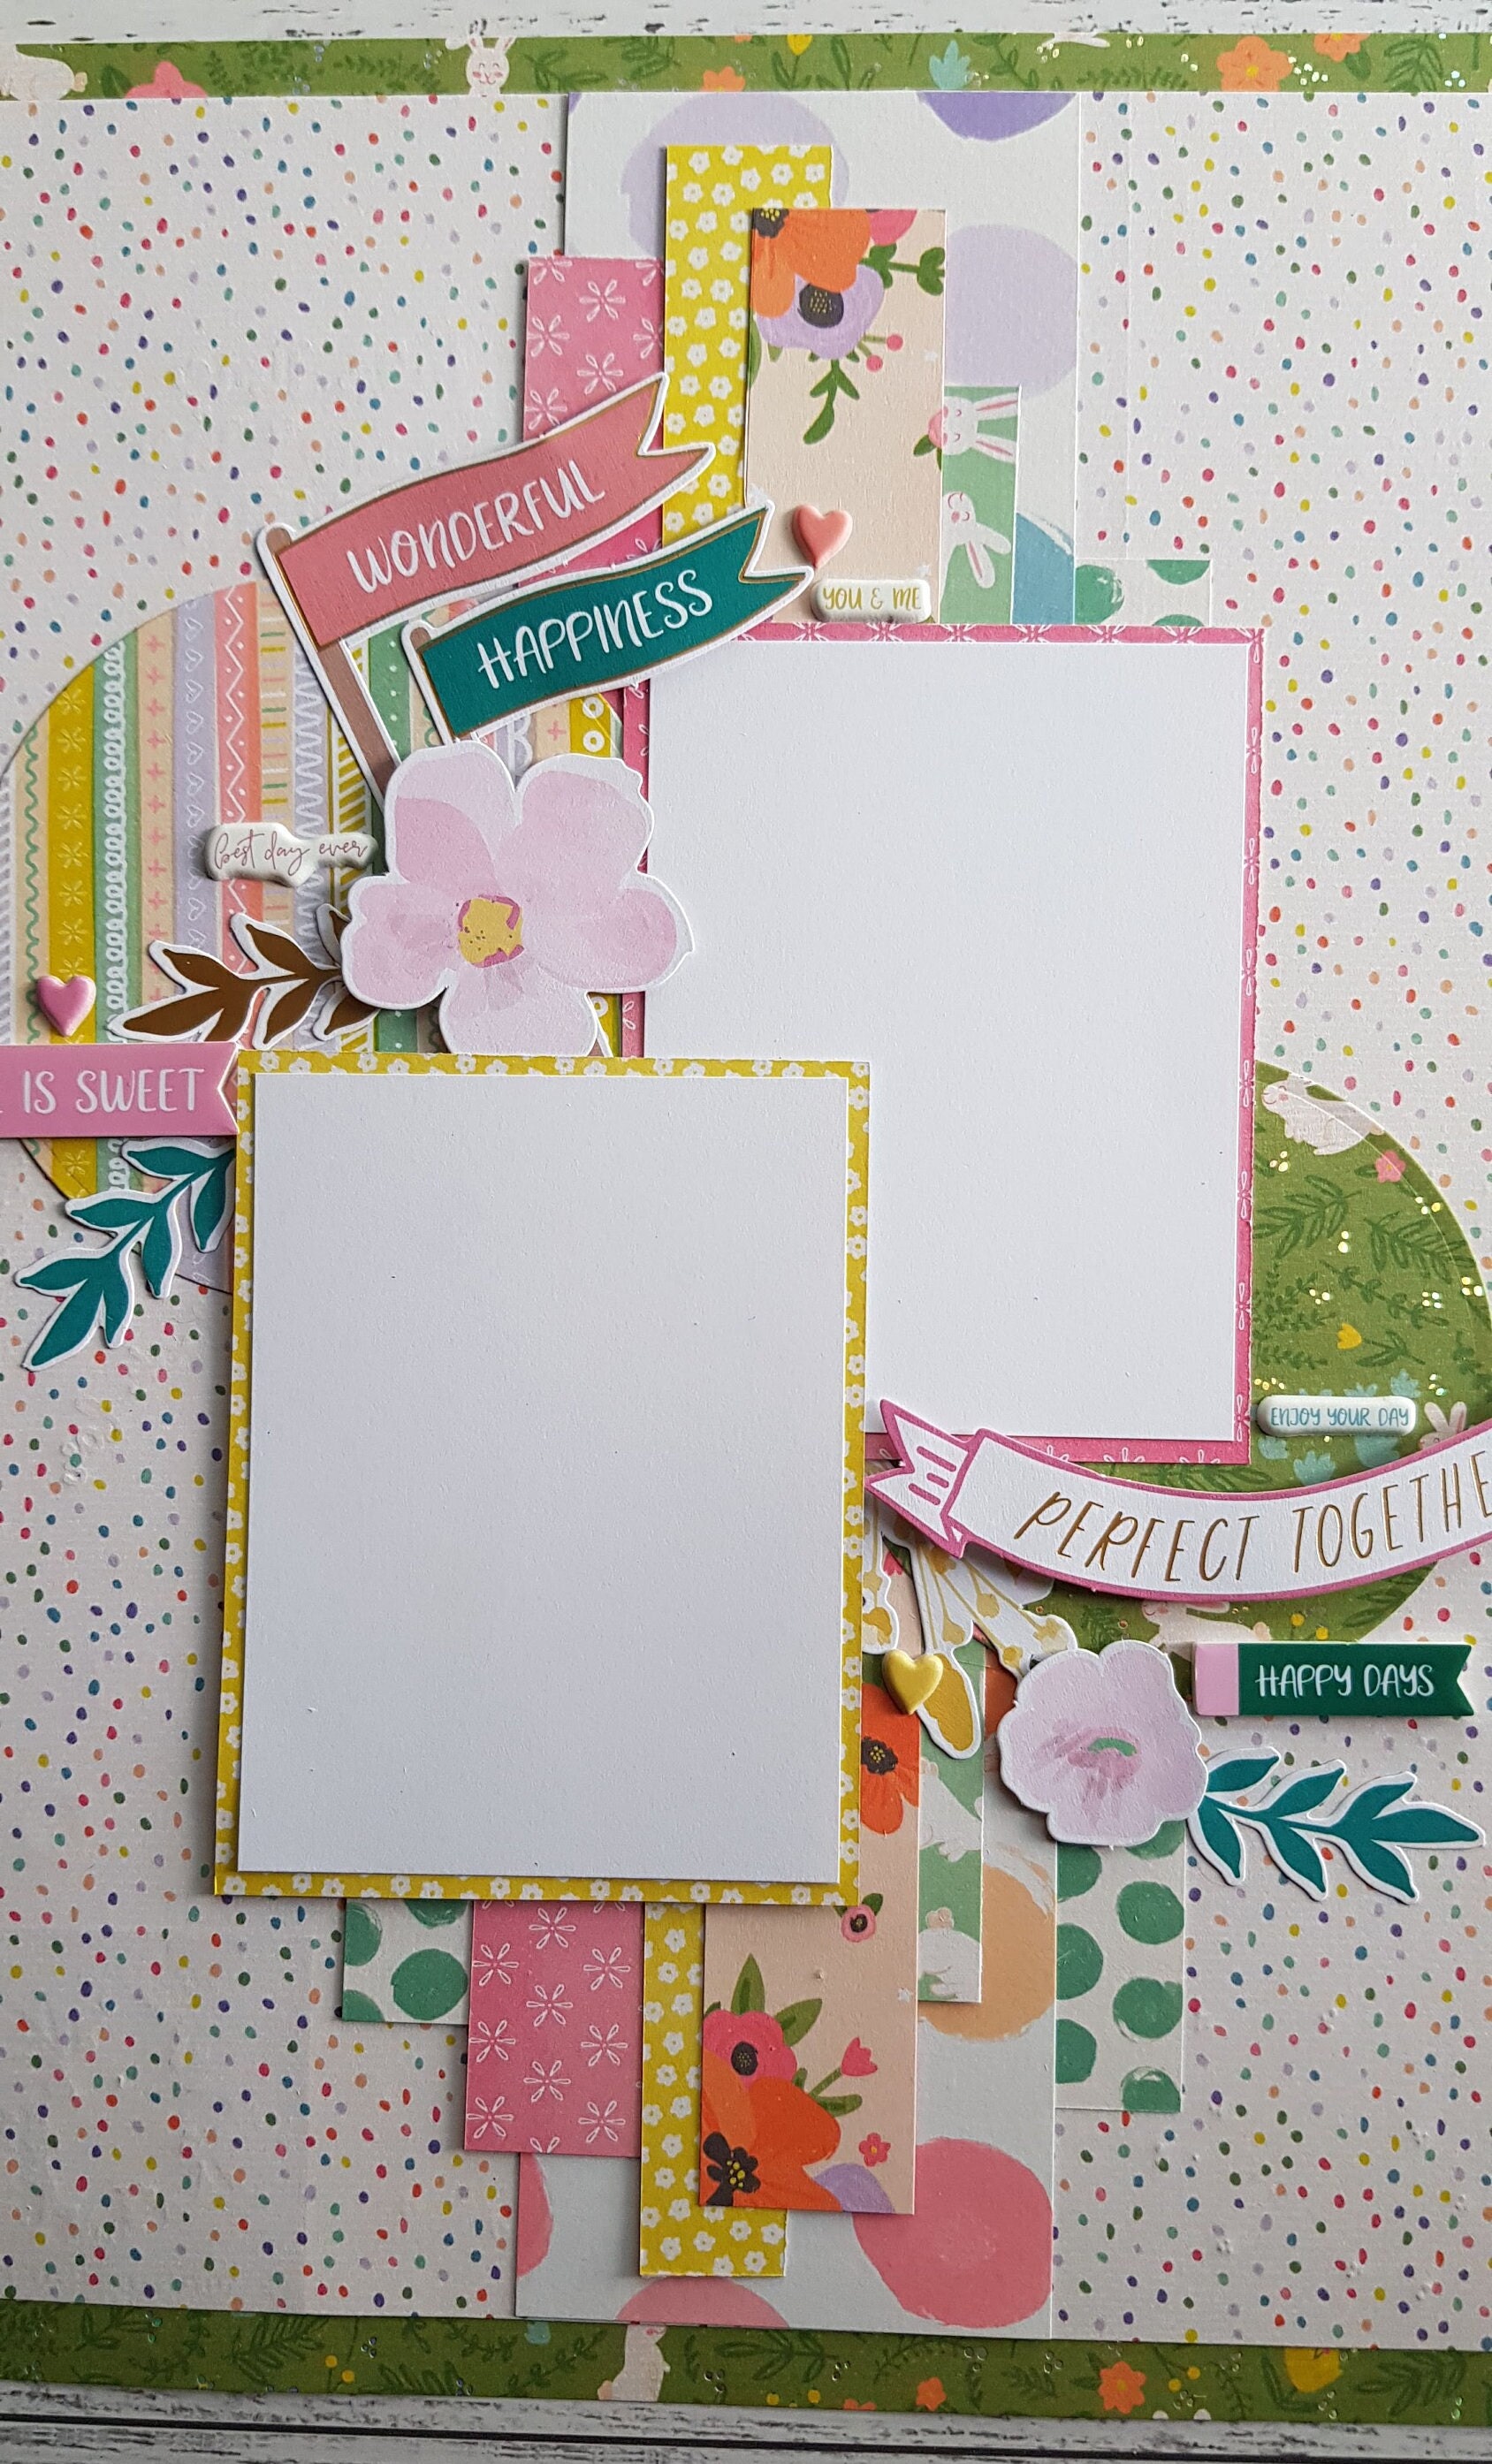 Scrapbook Layout Share  32 Scrapbooking Ideas to Inspire You! - Playing  with Paper